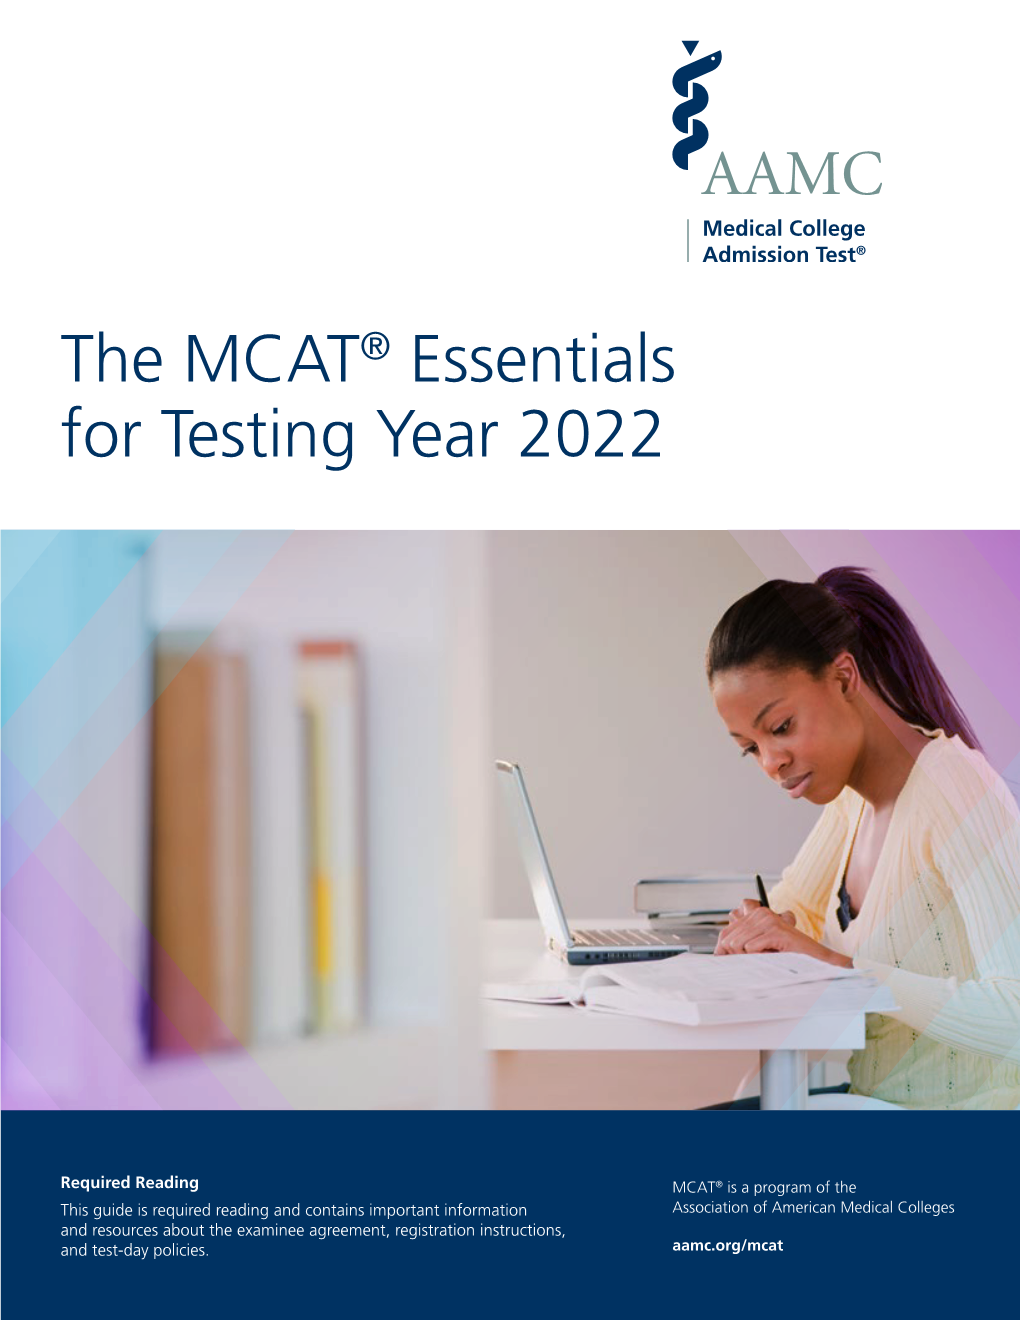 The MCAT® Essentials for Testing Year 2022